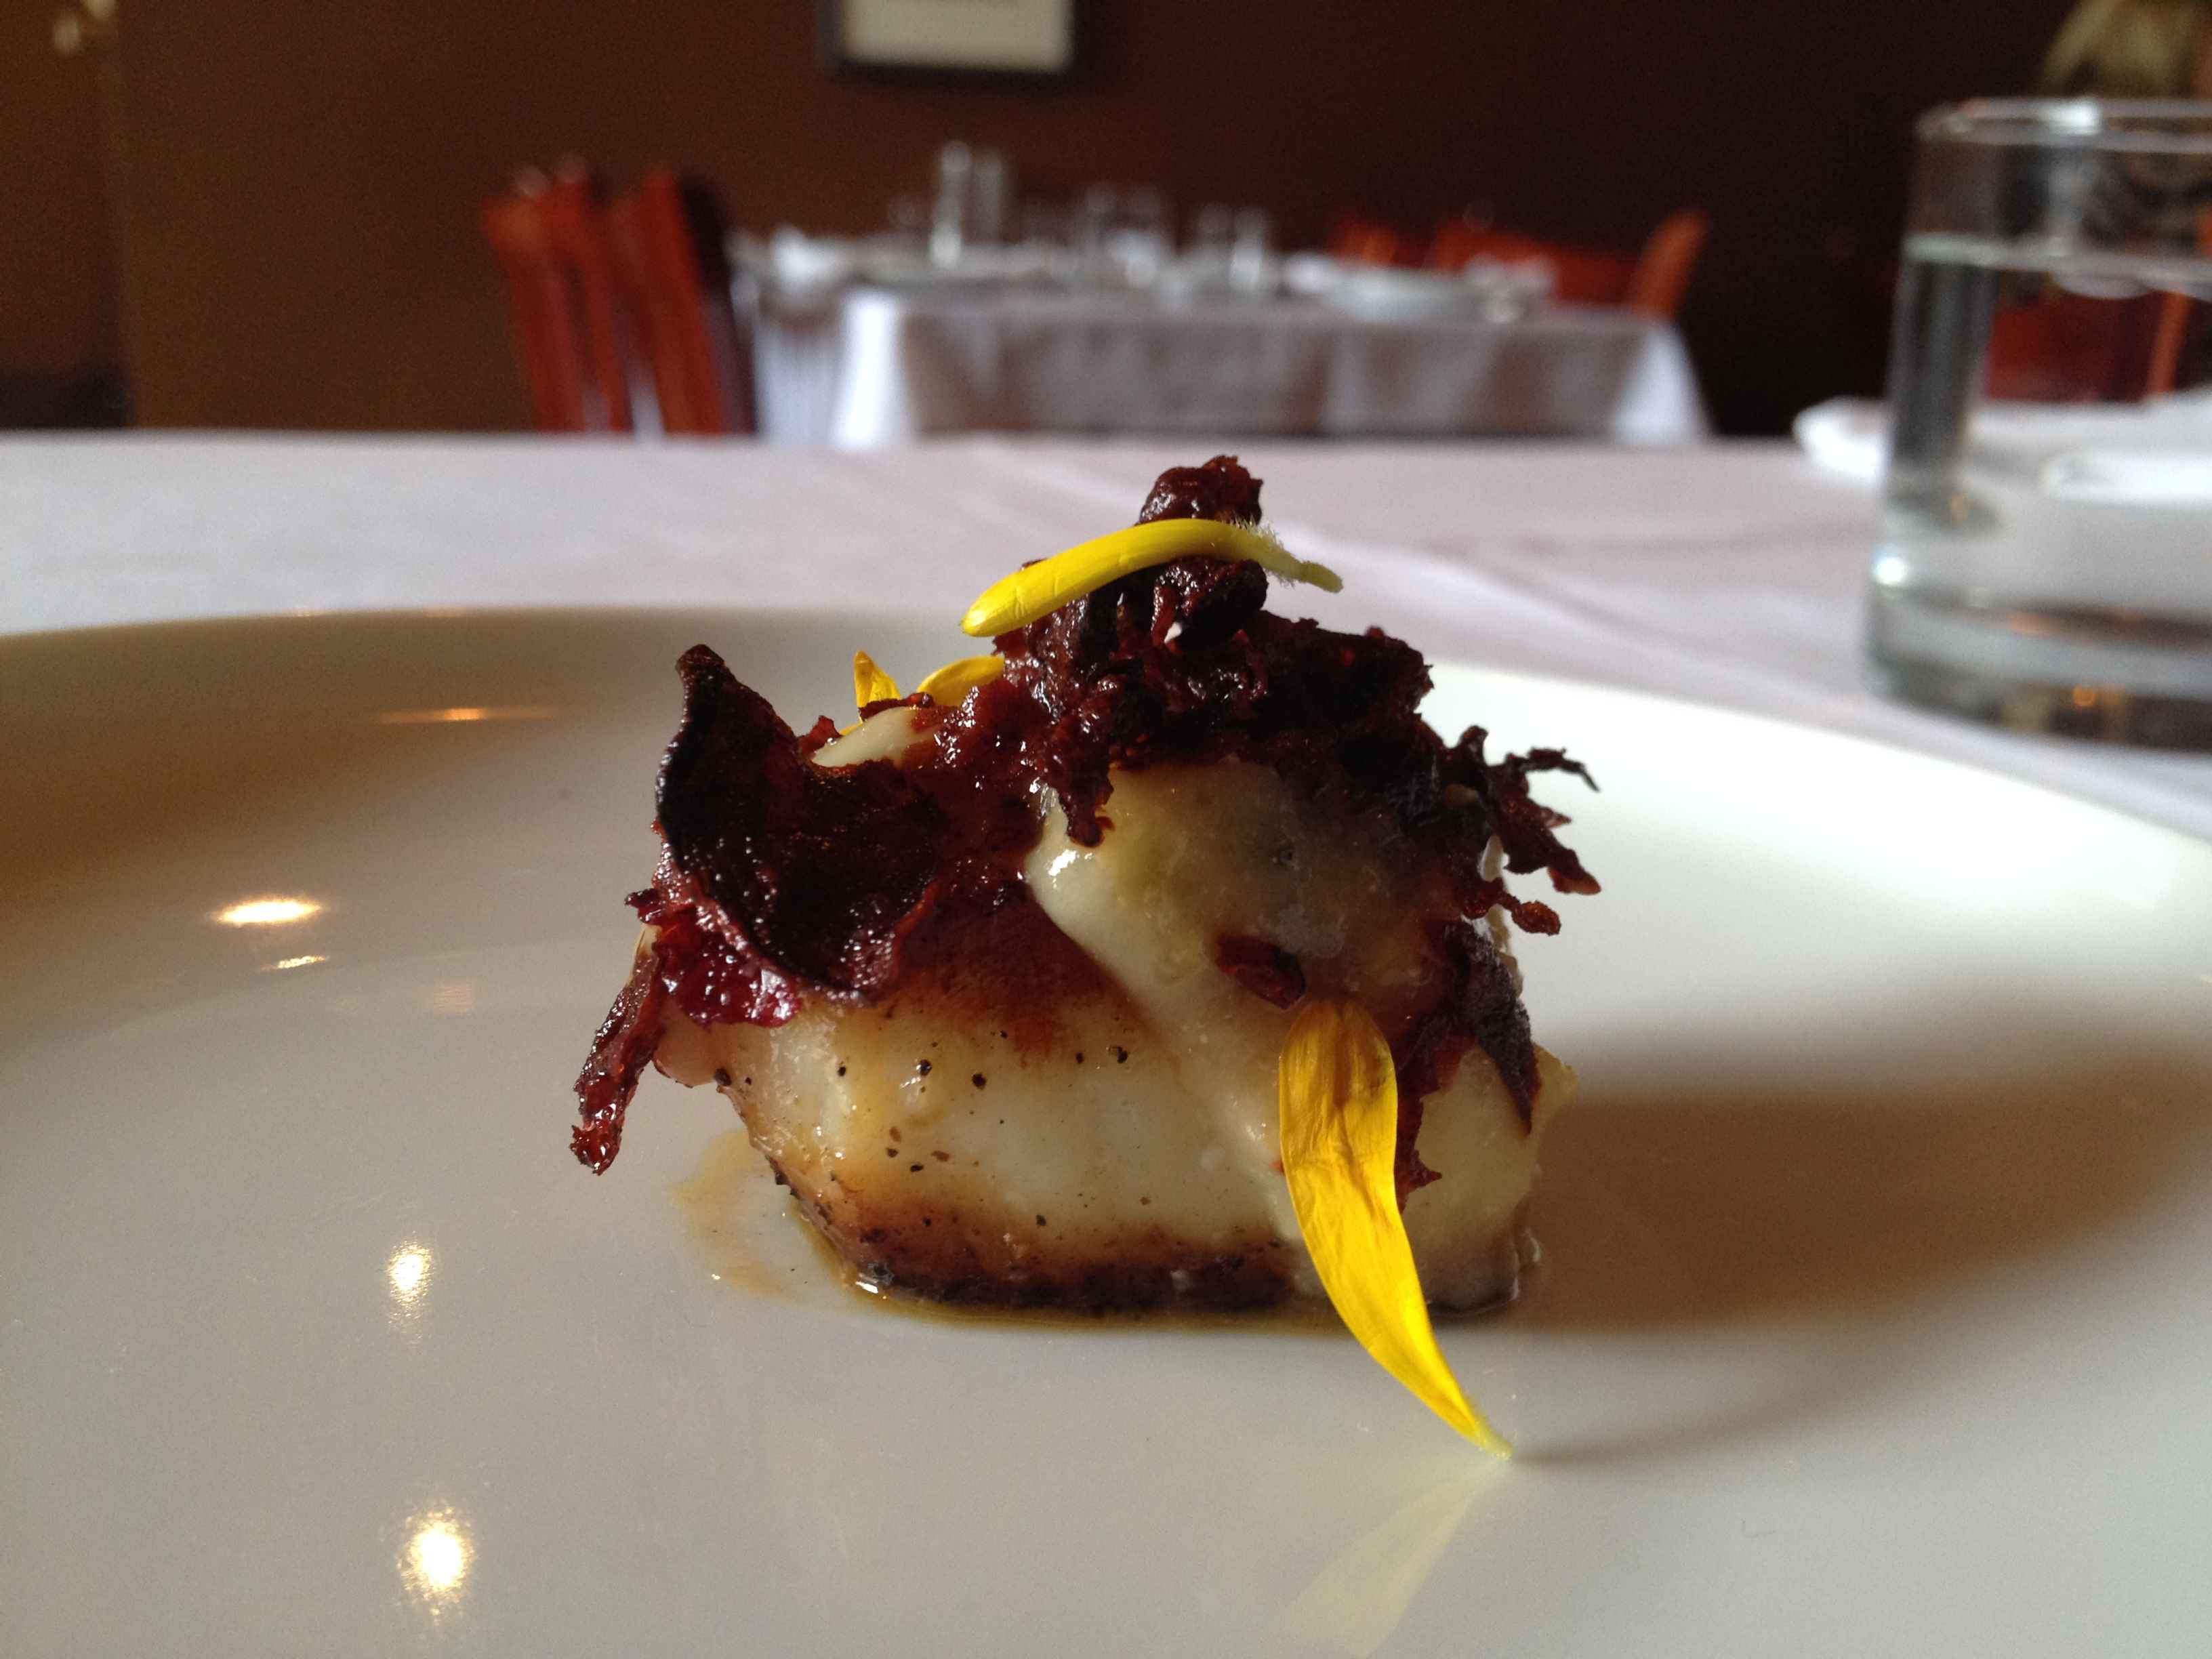 Seared scallops with saffron cauliflower, beet chips and preserved lemon at Chew.